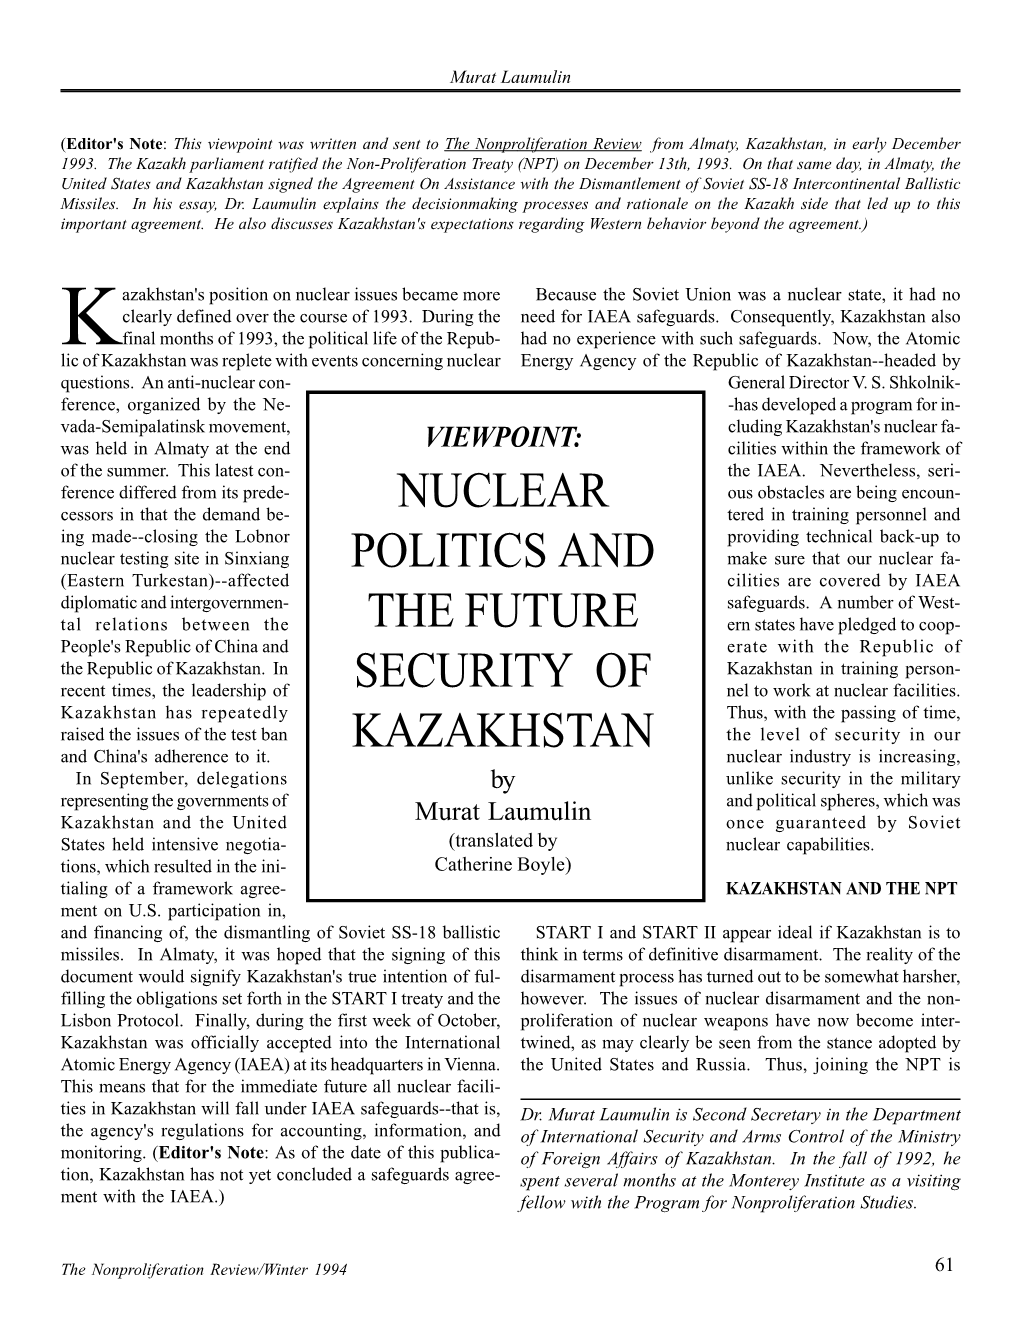 NPR 1.2: Nuclear Politics and the Future Security of Kazakhstan